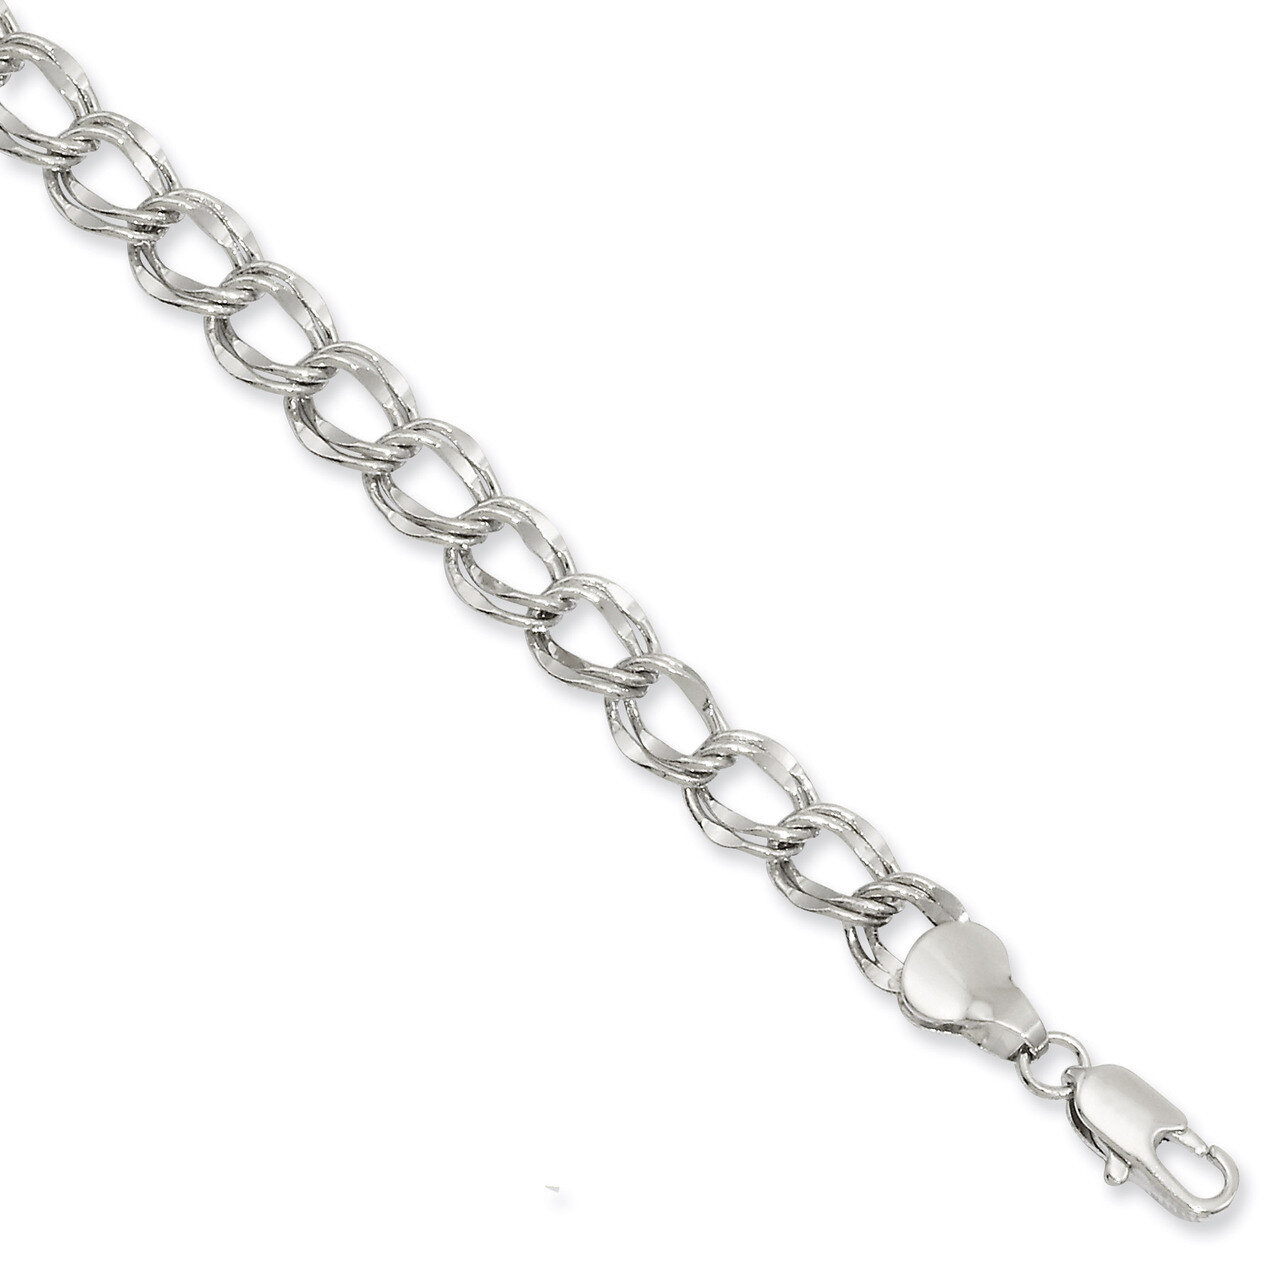 Kelly Waters 6.5mm Double Link Charm Bracelet 7 Inch Rhodium-plated KW492-7.25